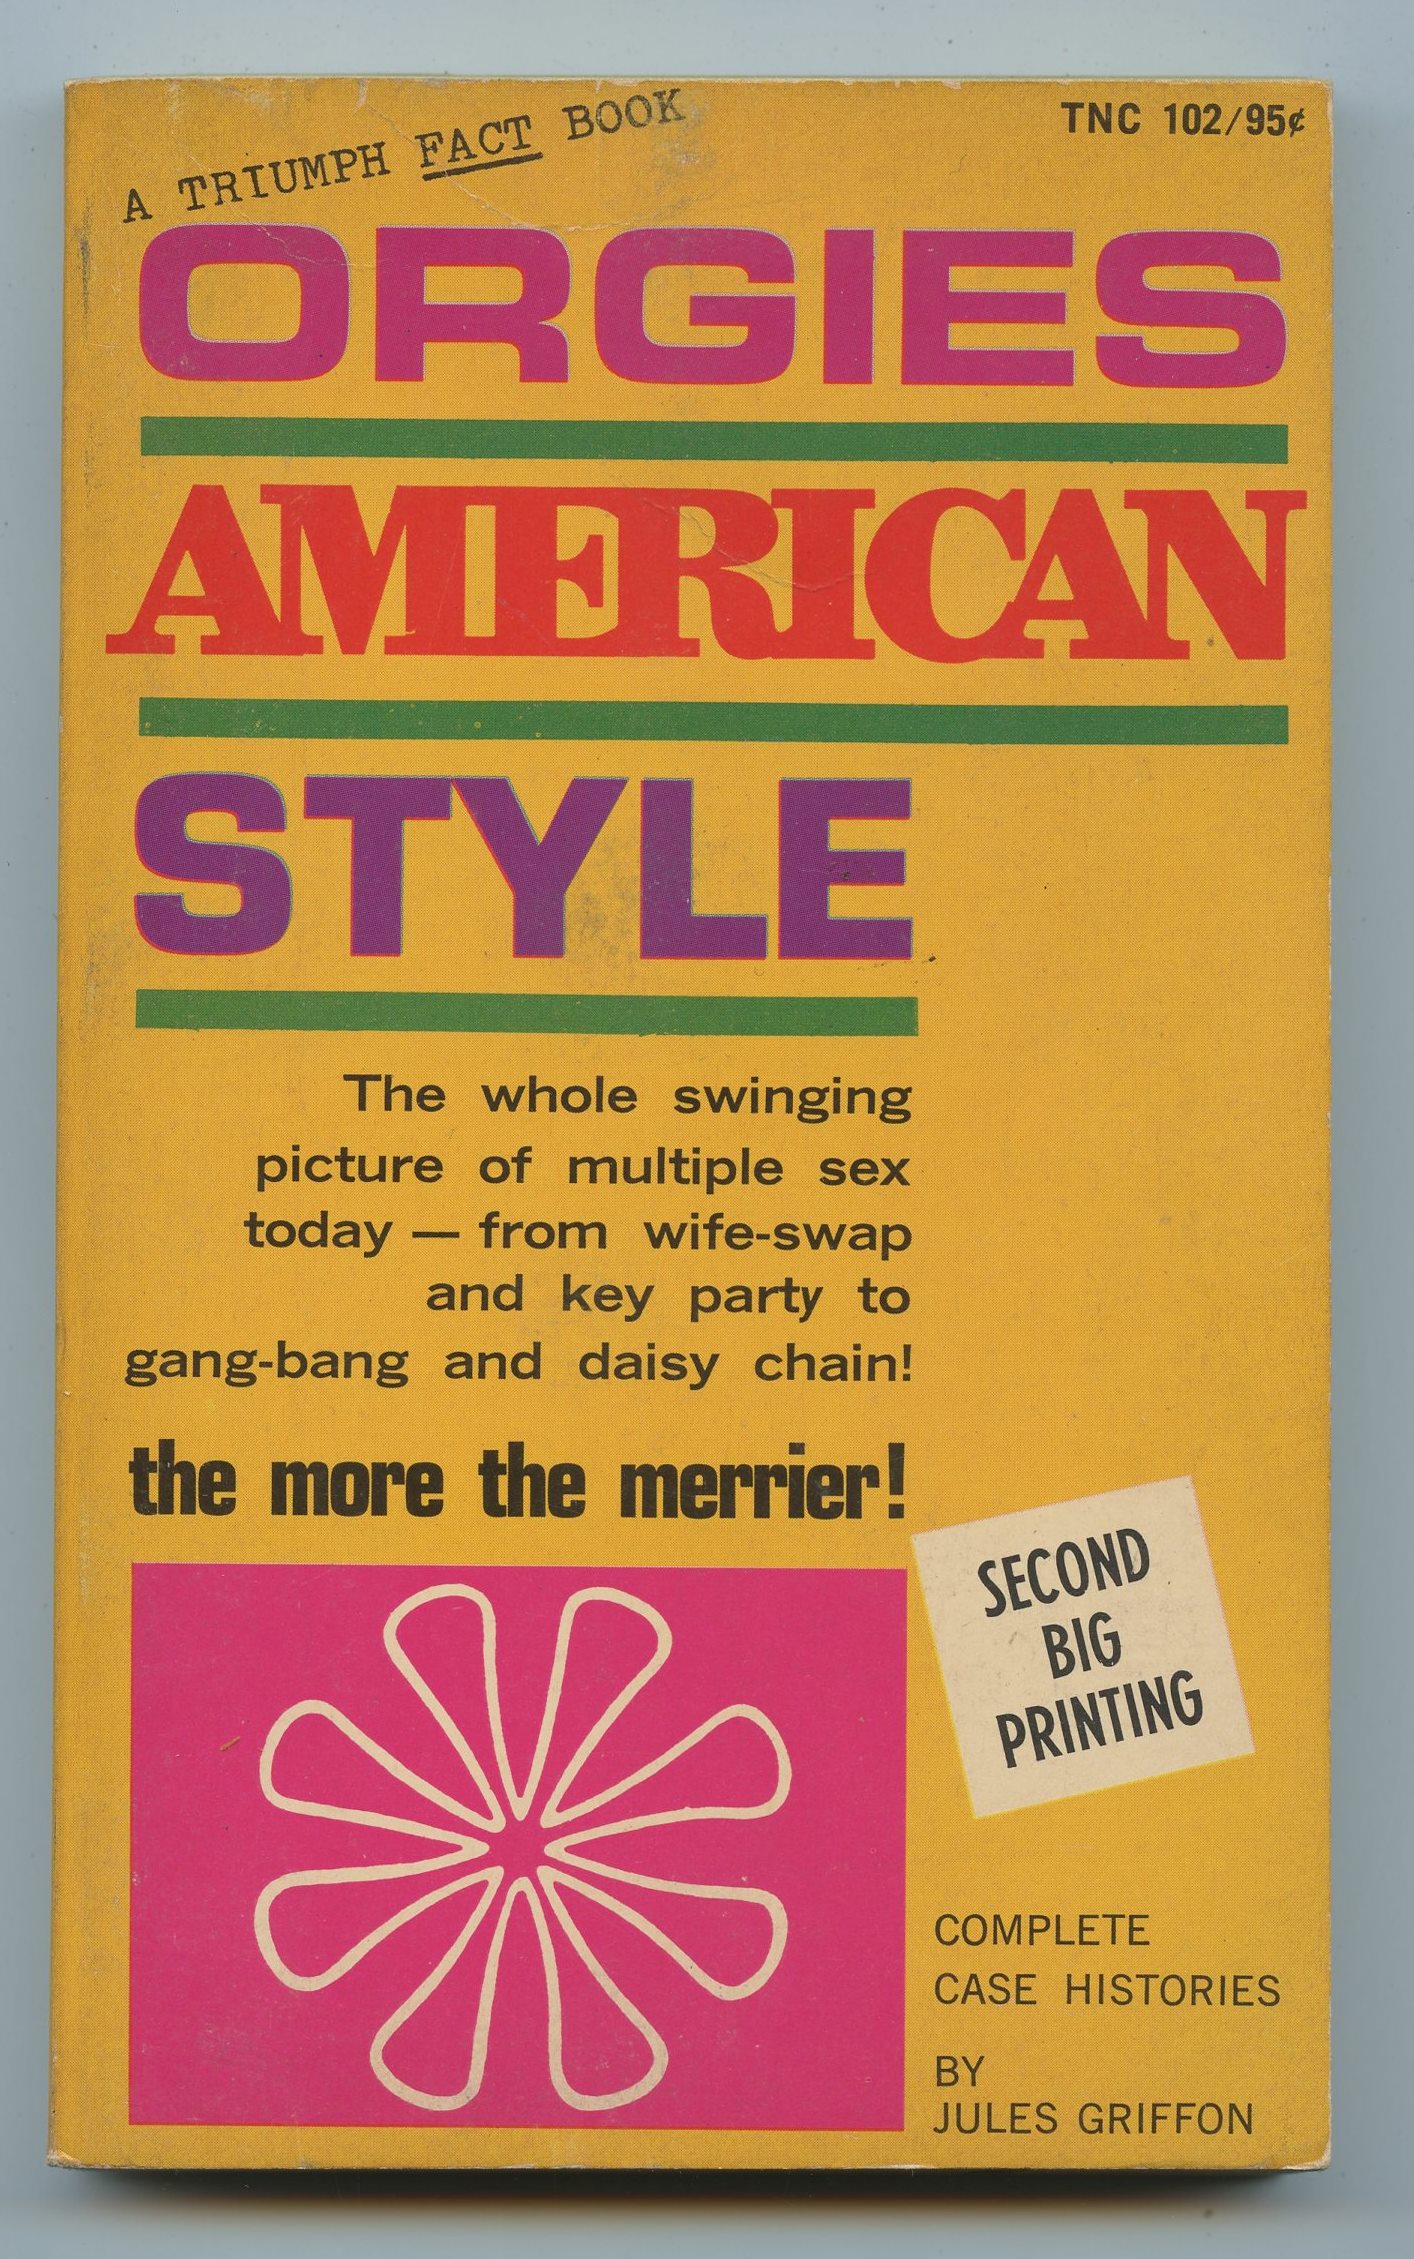 Orgies American Style by GRIFFON, Jules Very good Softcover (1968) Second Big Printing